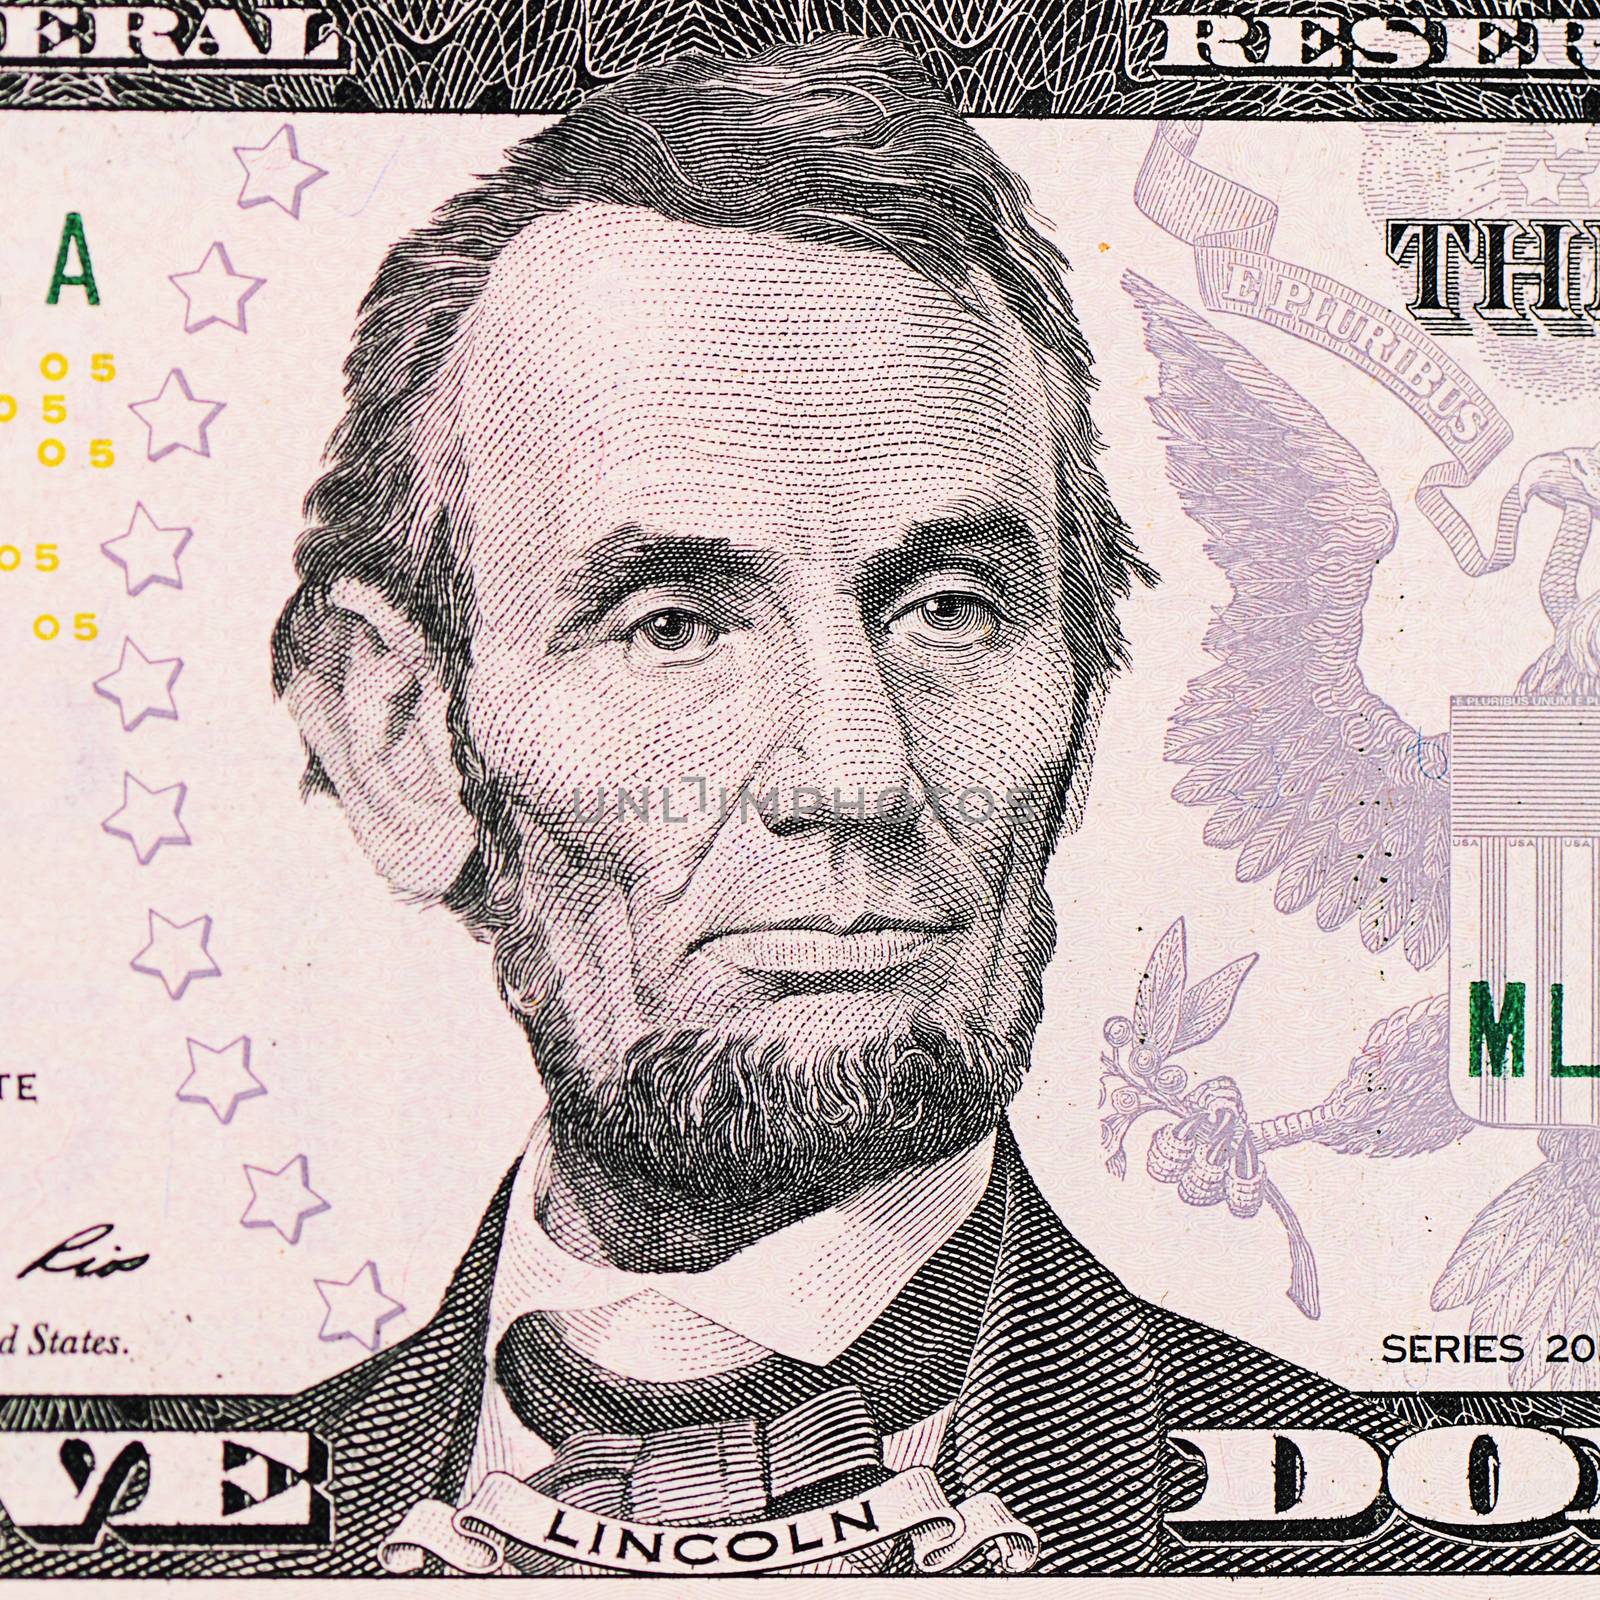 The face of Lincoln the dollar bill